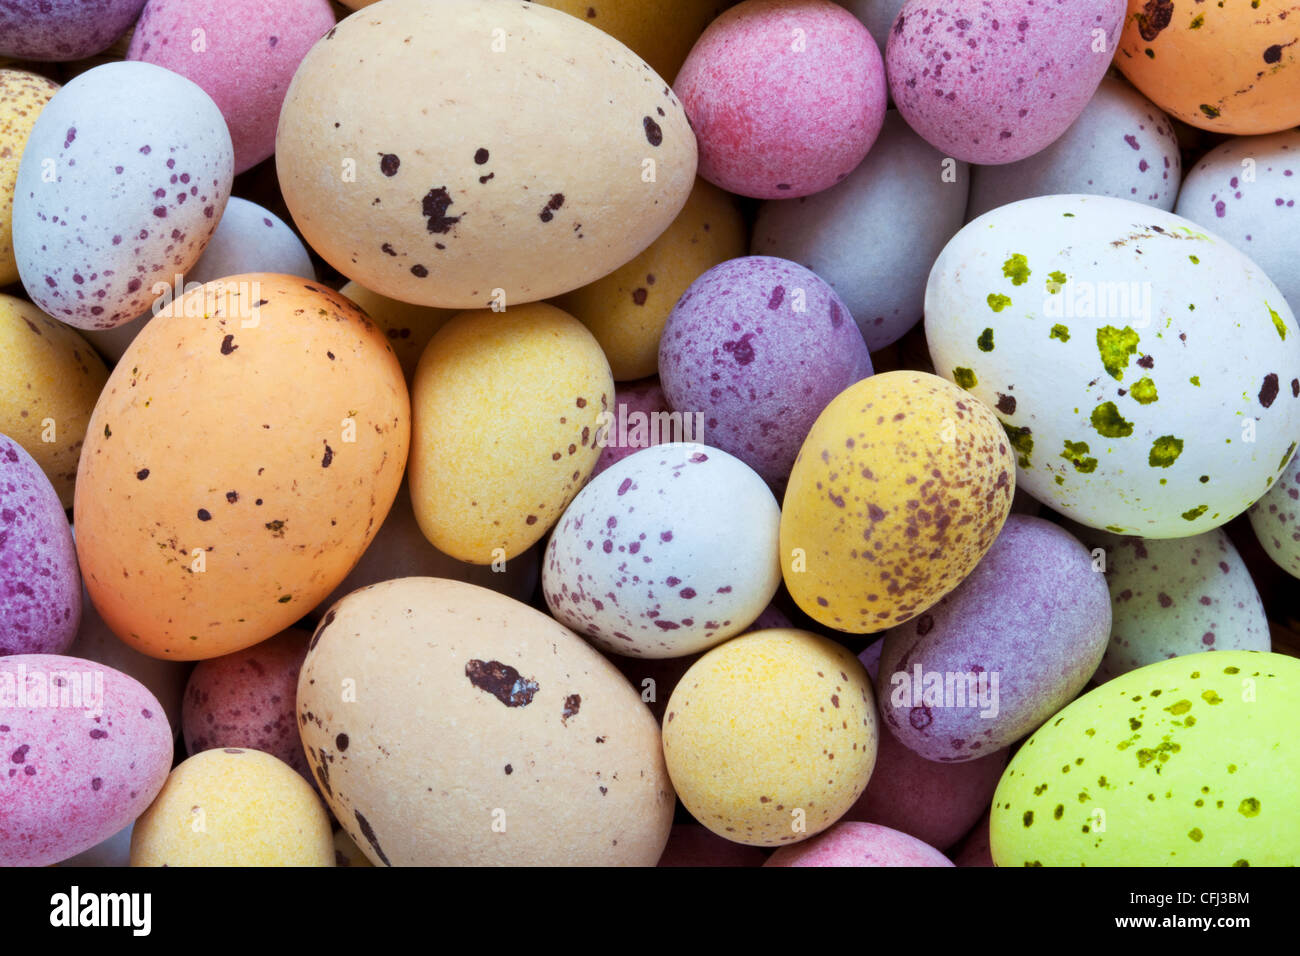 Still life photo of lots of colourful speckled candy covered chocolate easter eggs Stock Photo